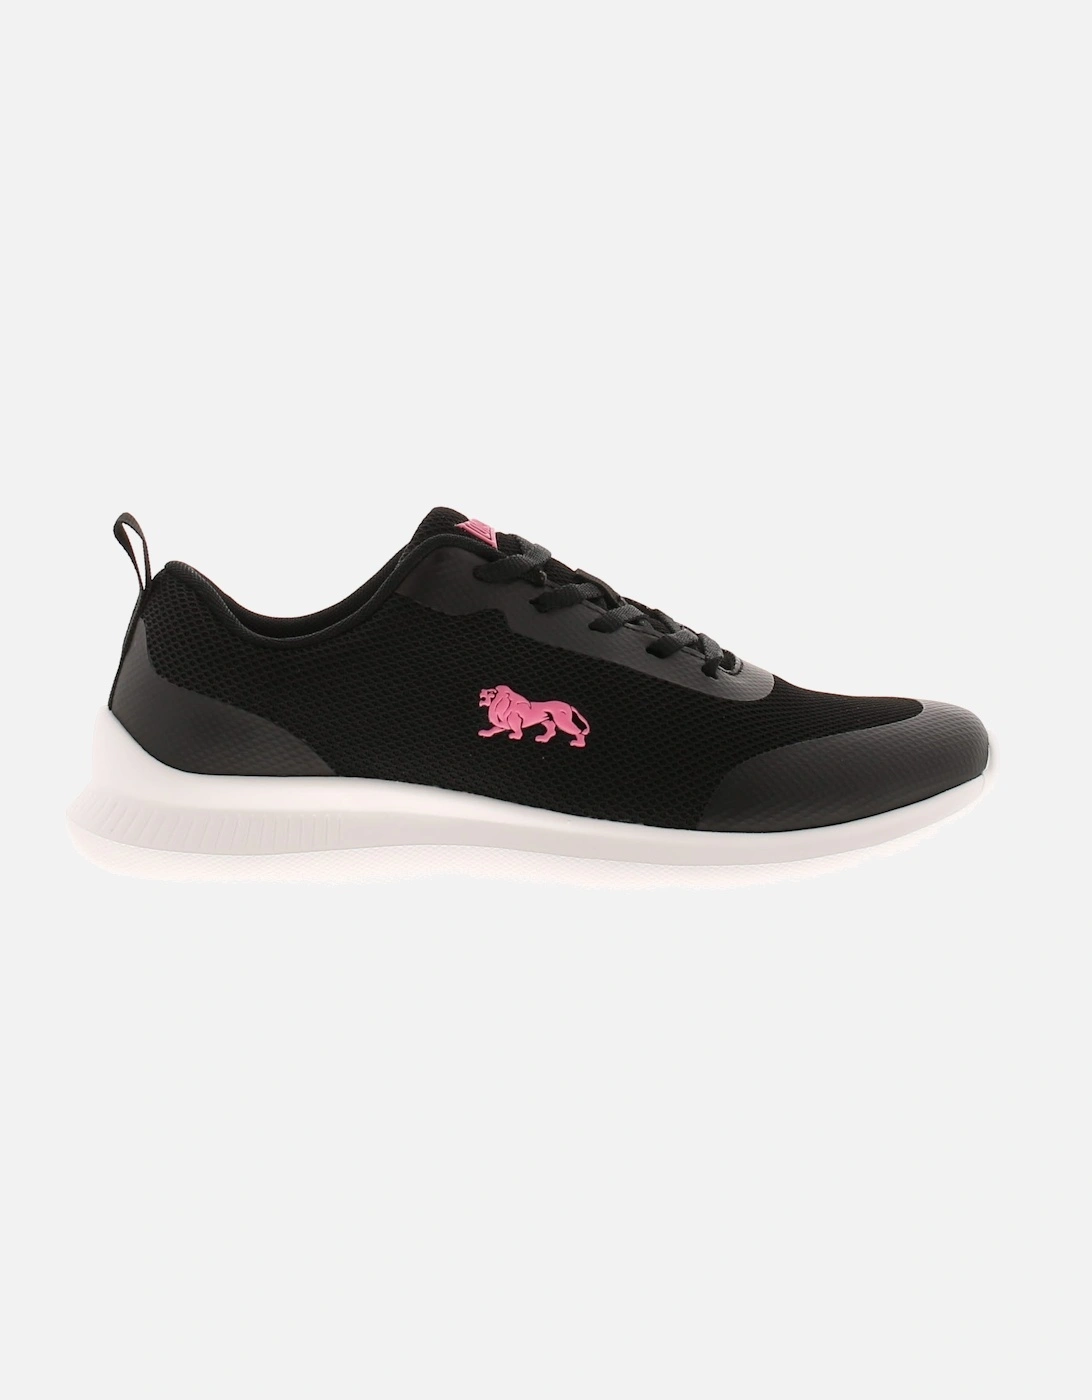 Womens Trainers Helmsdale Lace Up black UK Size